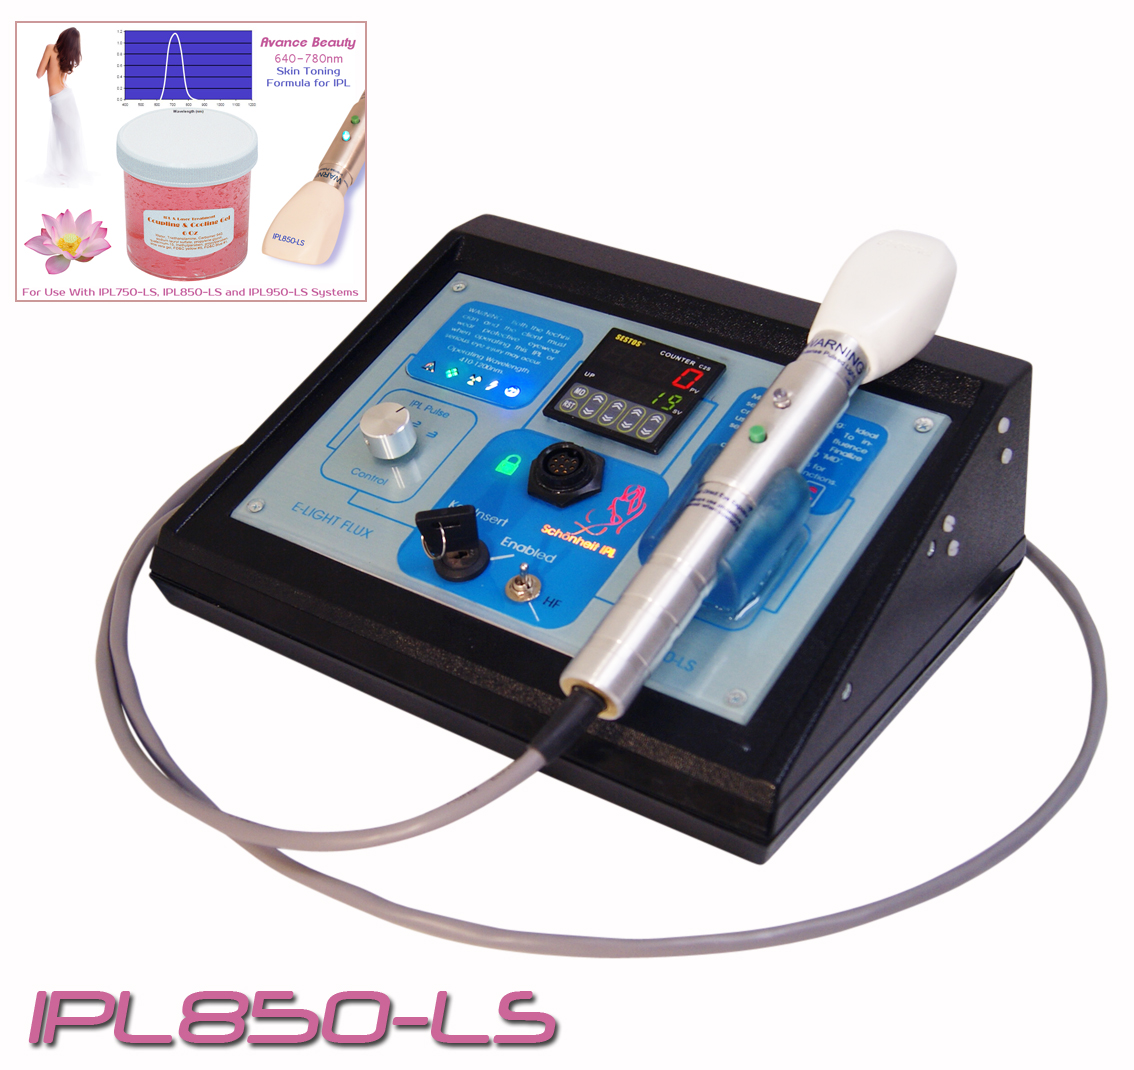 IPL850-LS Toning & Tightening Gel Kit 640-780nm with Beauty Treatment Machine, System, Device. 642057128568